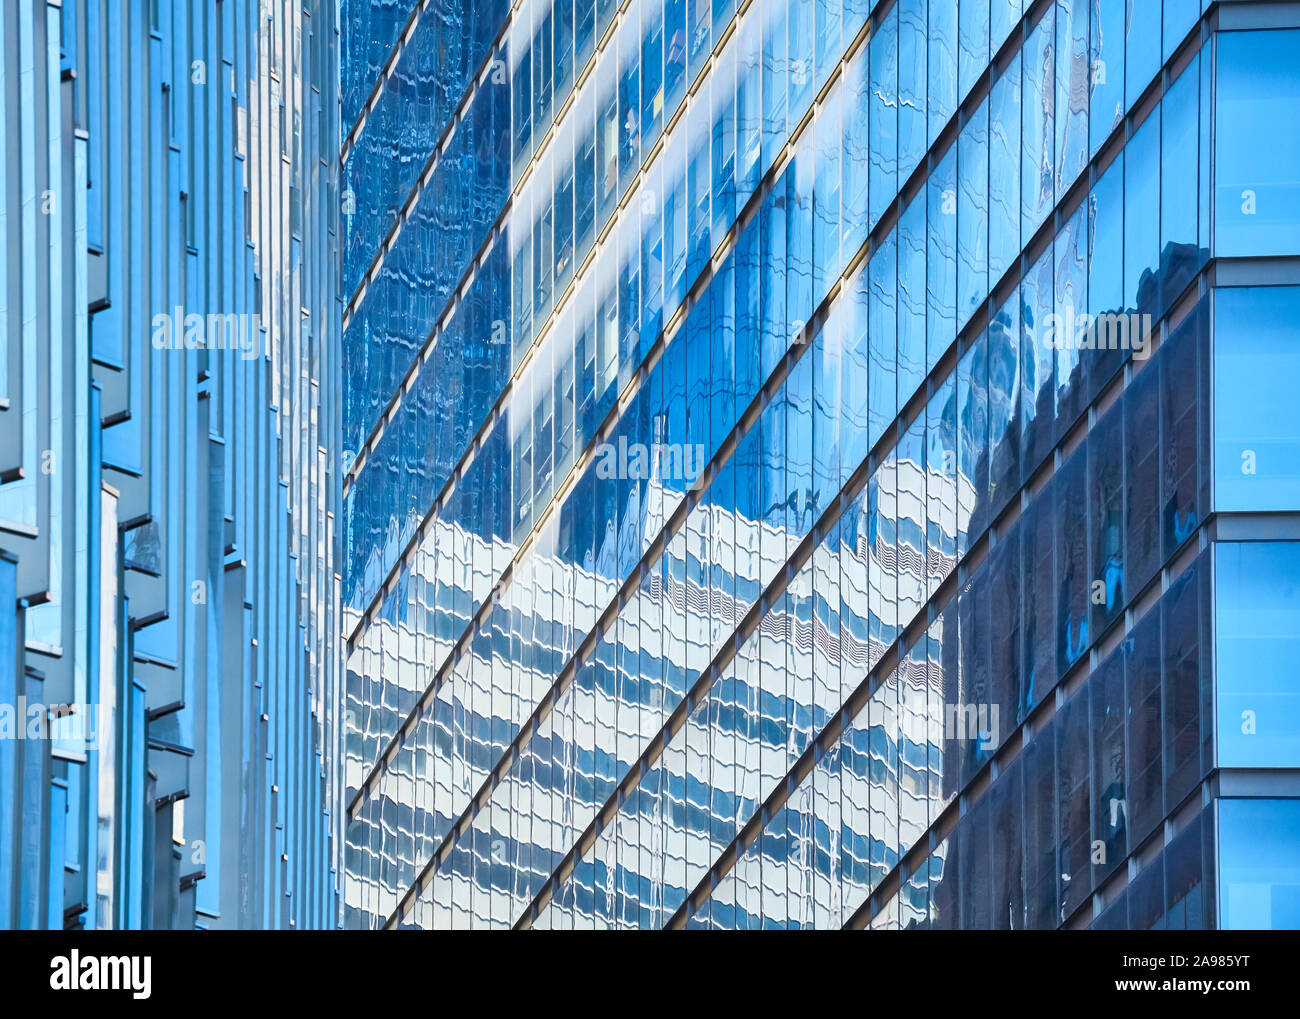 Modern buildings reflected in glass facades, abstract architectural background. Stock Photo